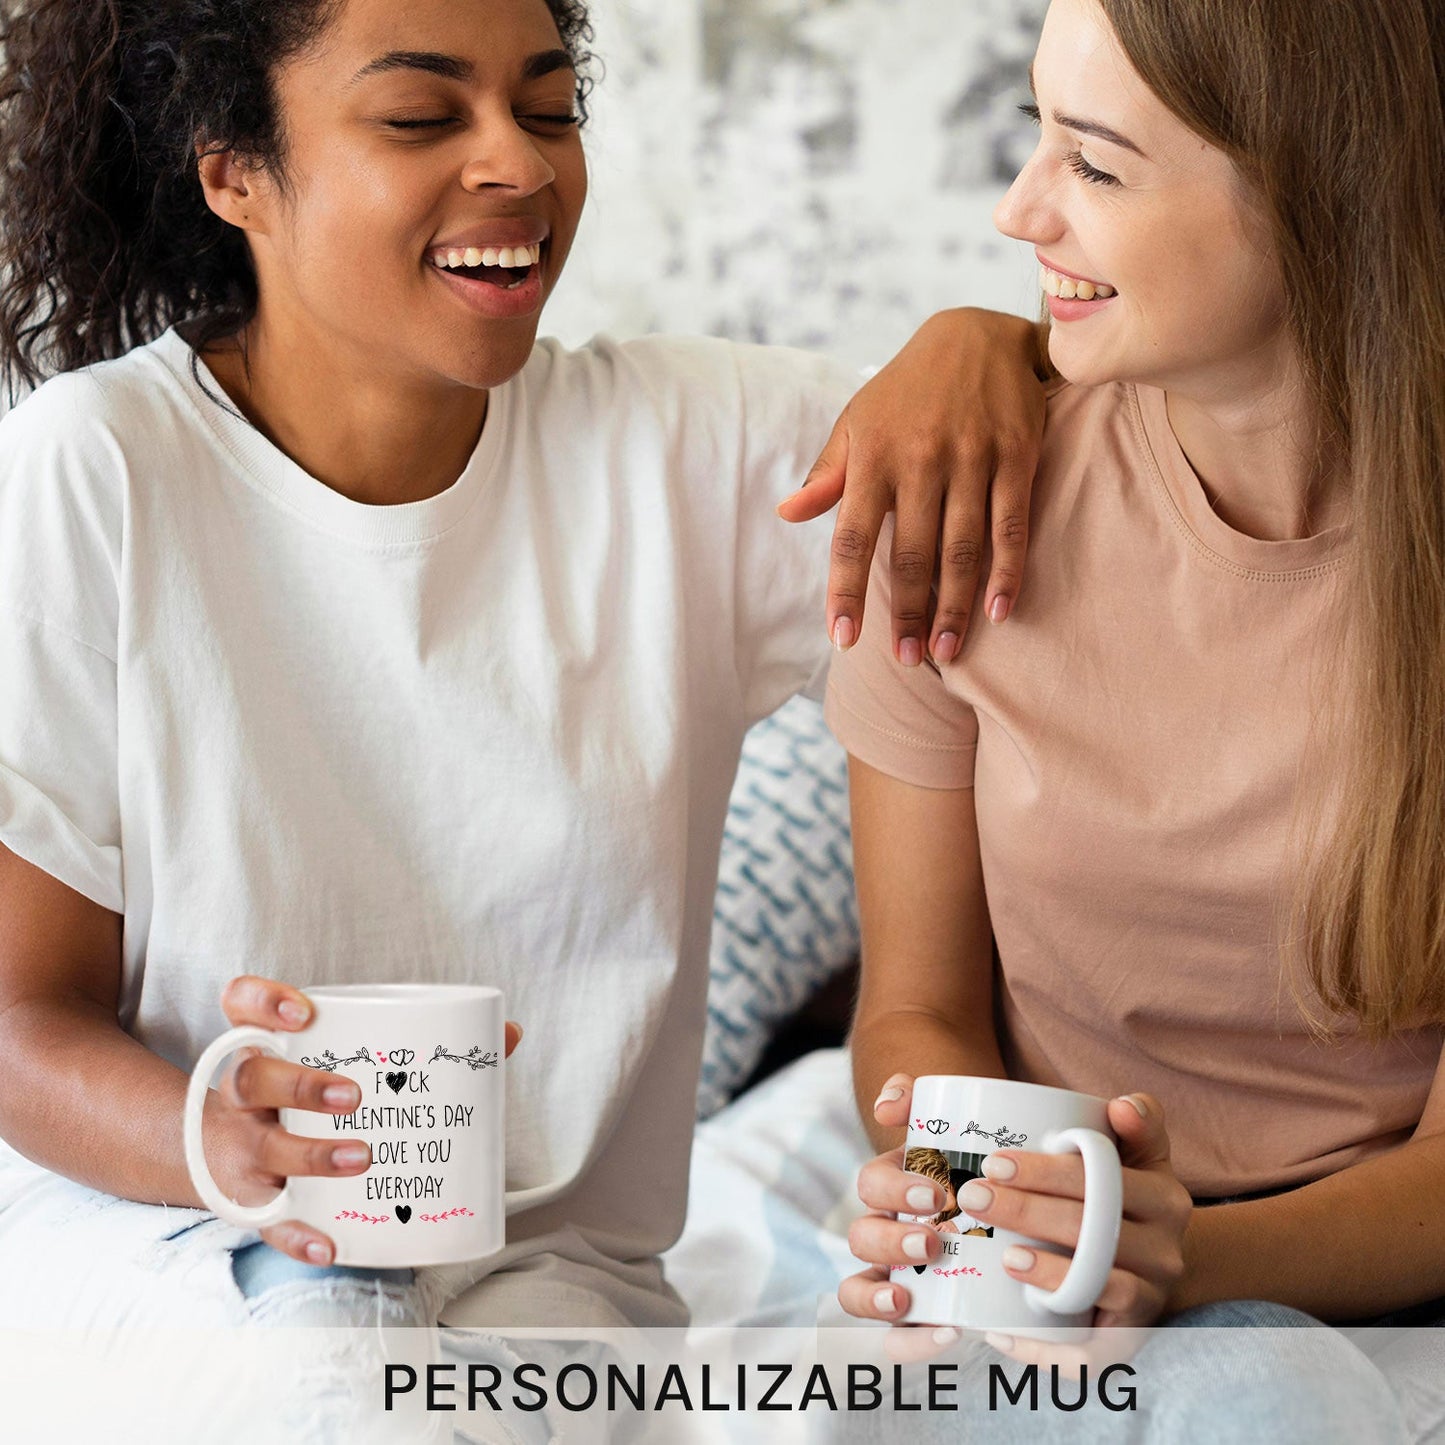 I Love You Everyday - Personalized Valentine's Day gift For Him or Her - Custom Mug - MyMindfulGifts